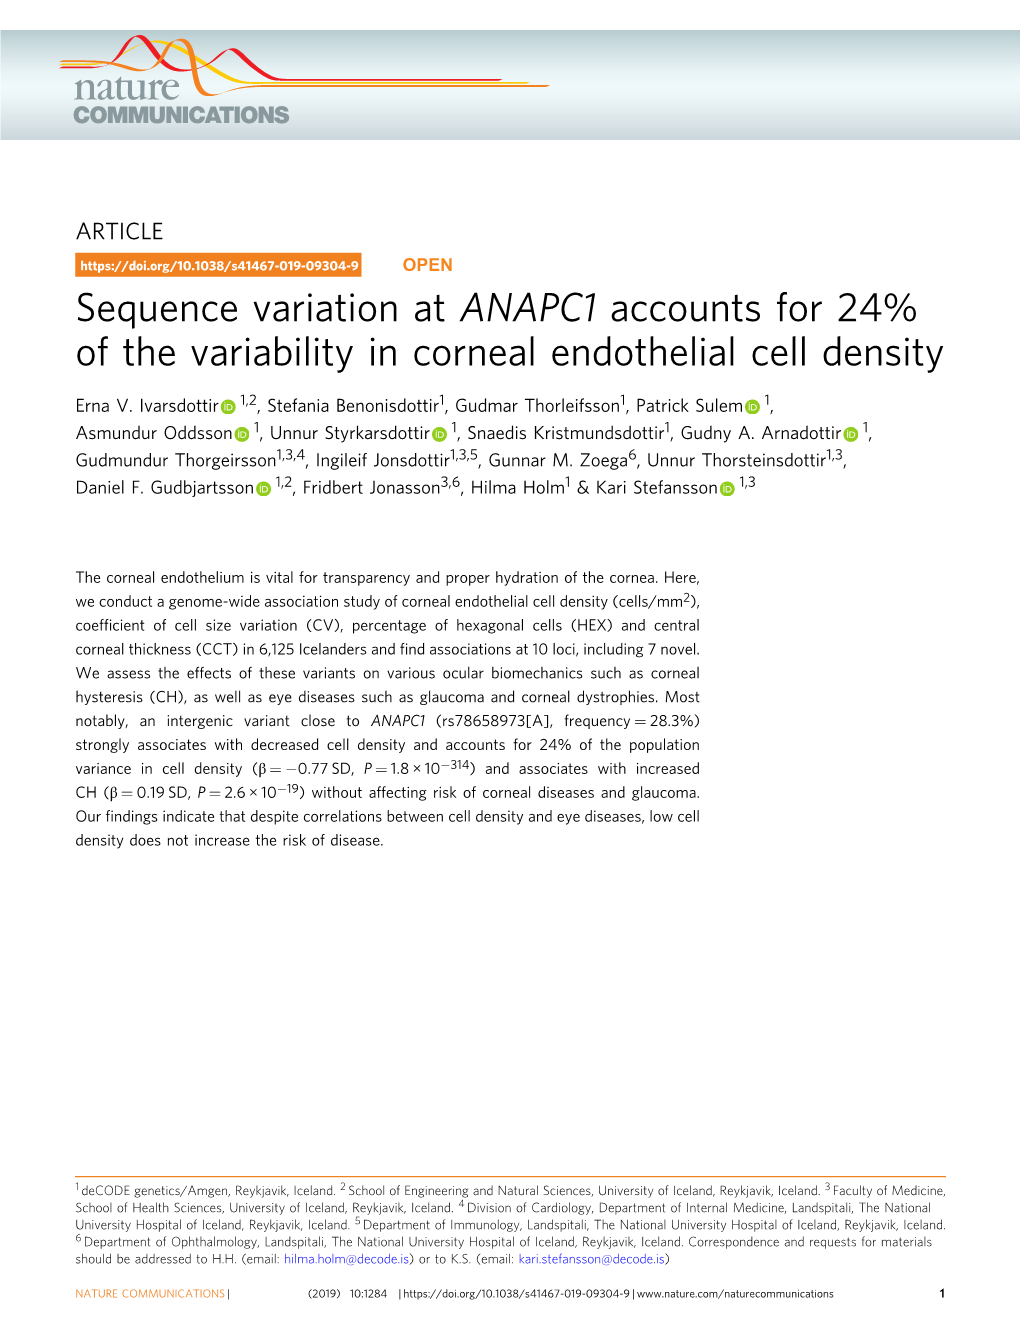 Sequence Variation at ANAPC1 Accounts for 24% of the Variability in Corneal Endothelial Cell Density